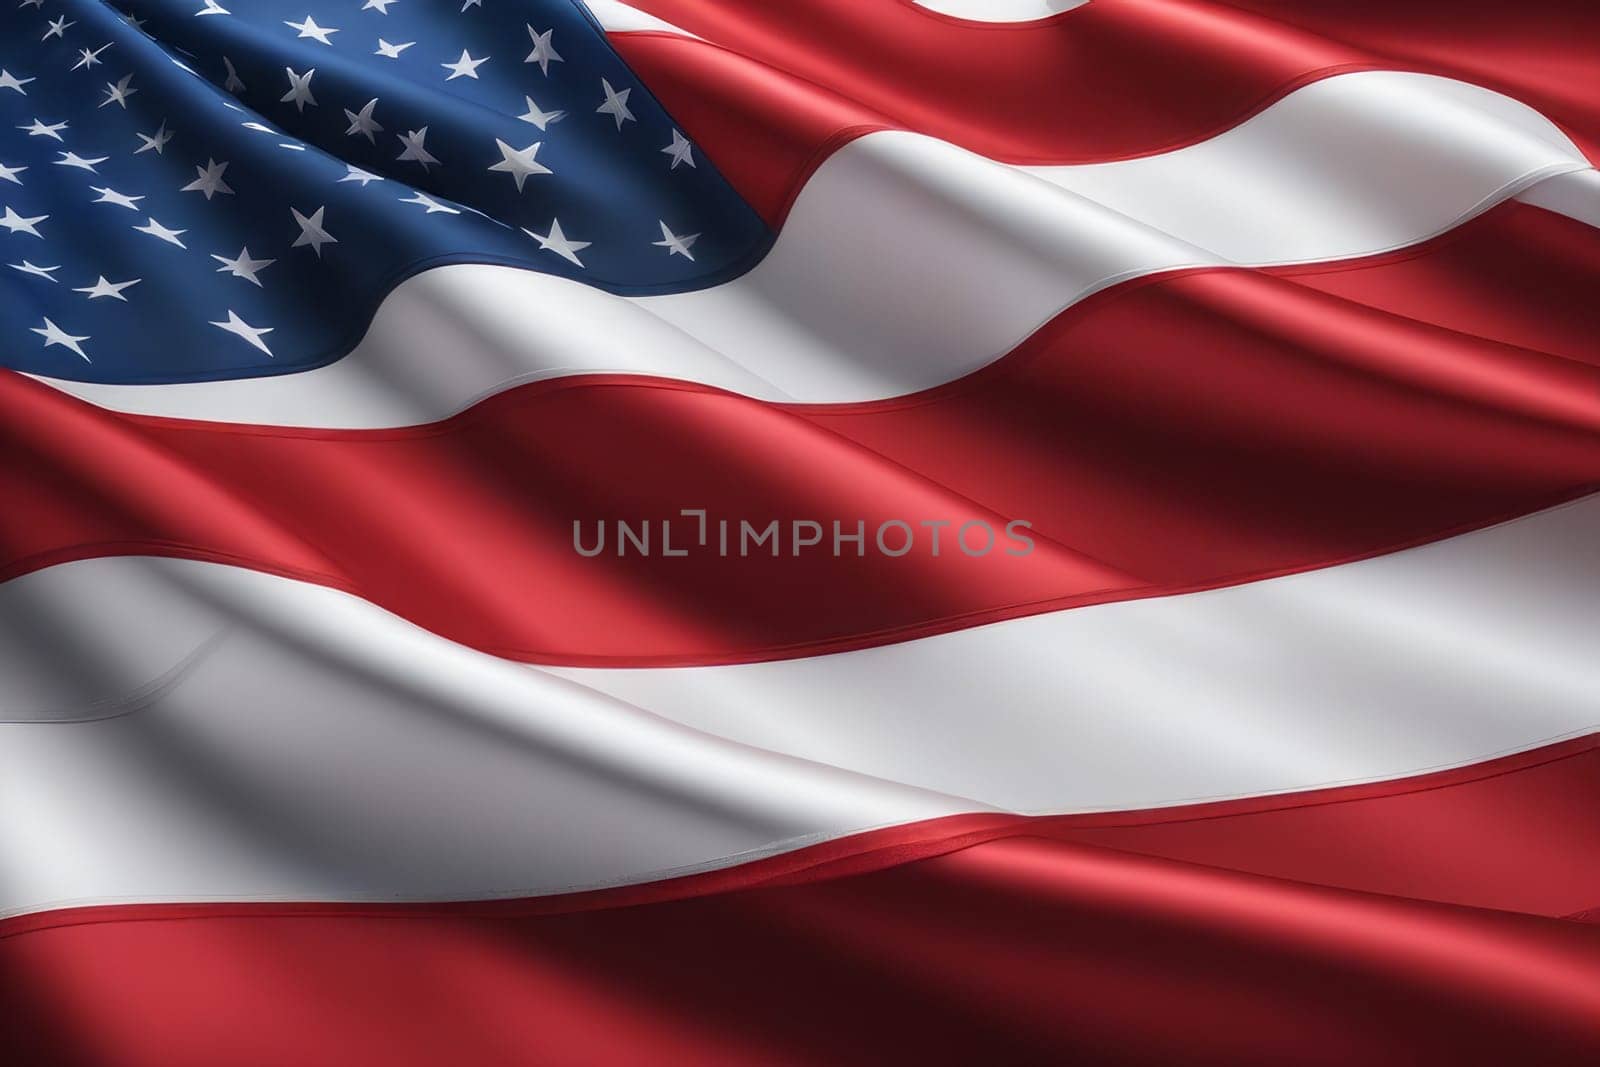 The close-up view of the American flag highlights its symbolic significance and historical importance, evoking a sense of unity and liberty. by Annu1tochka